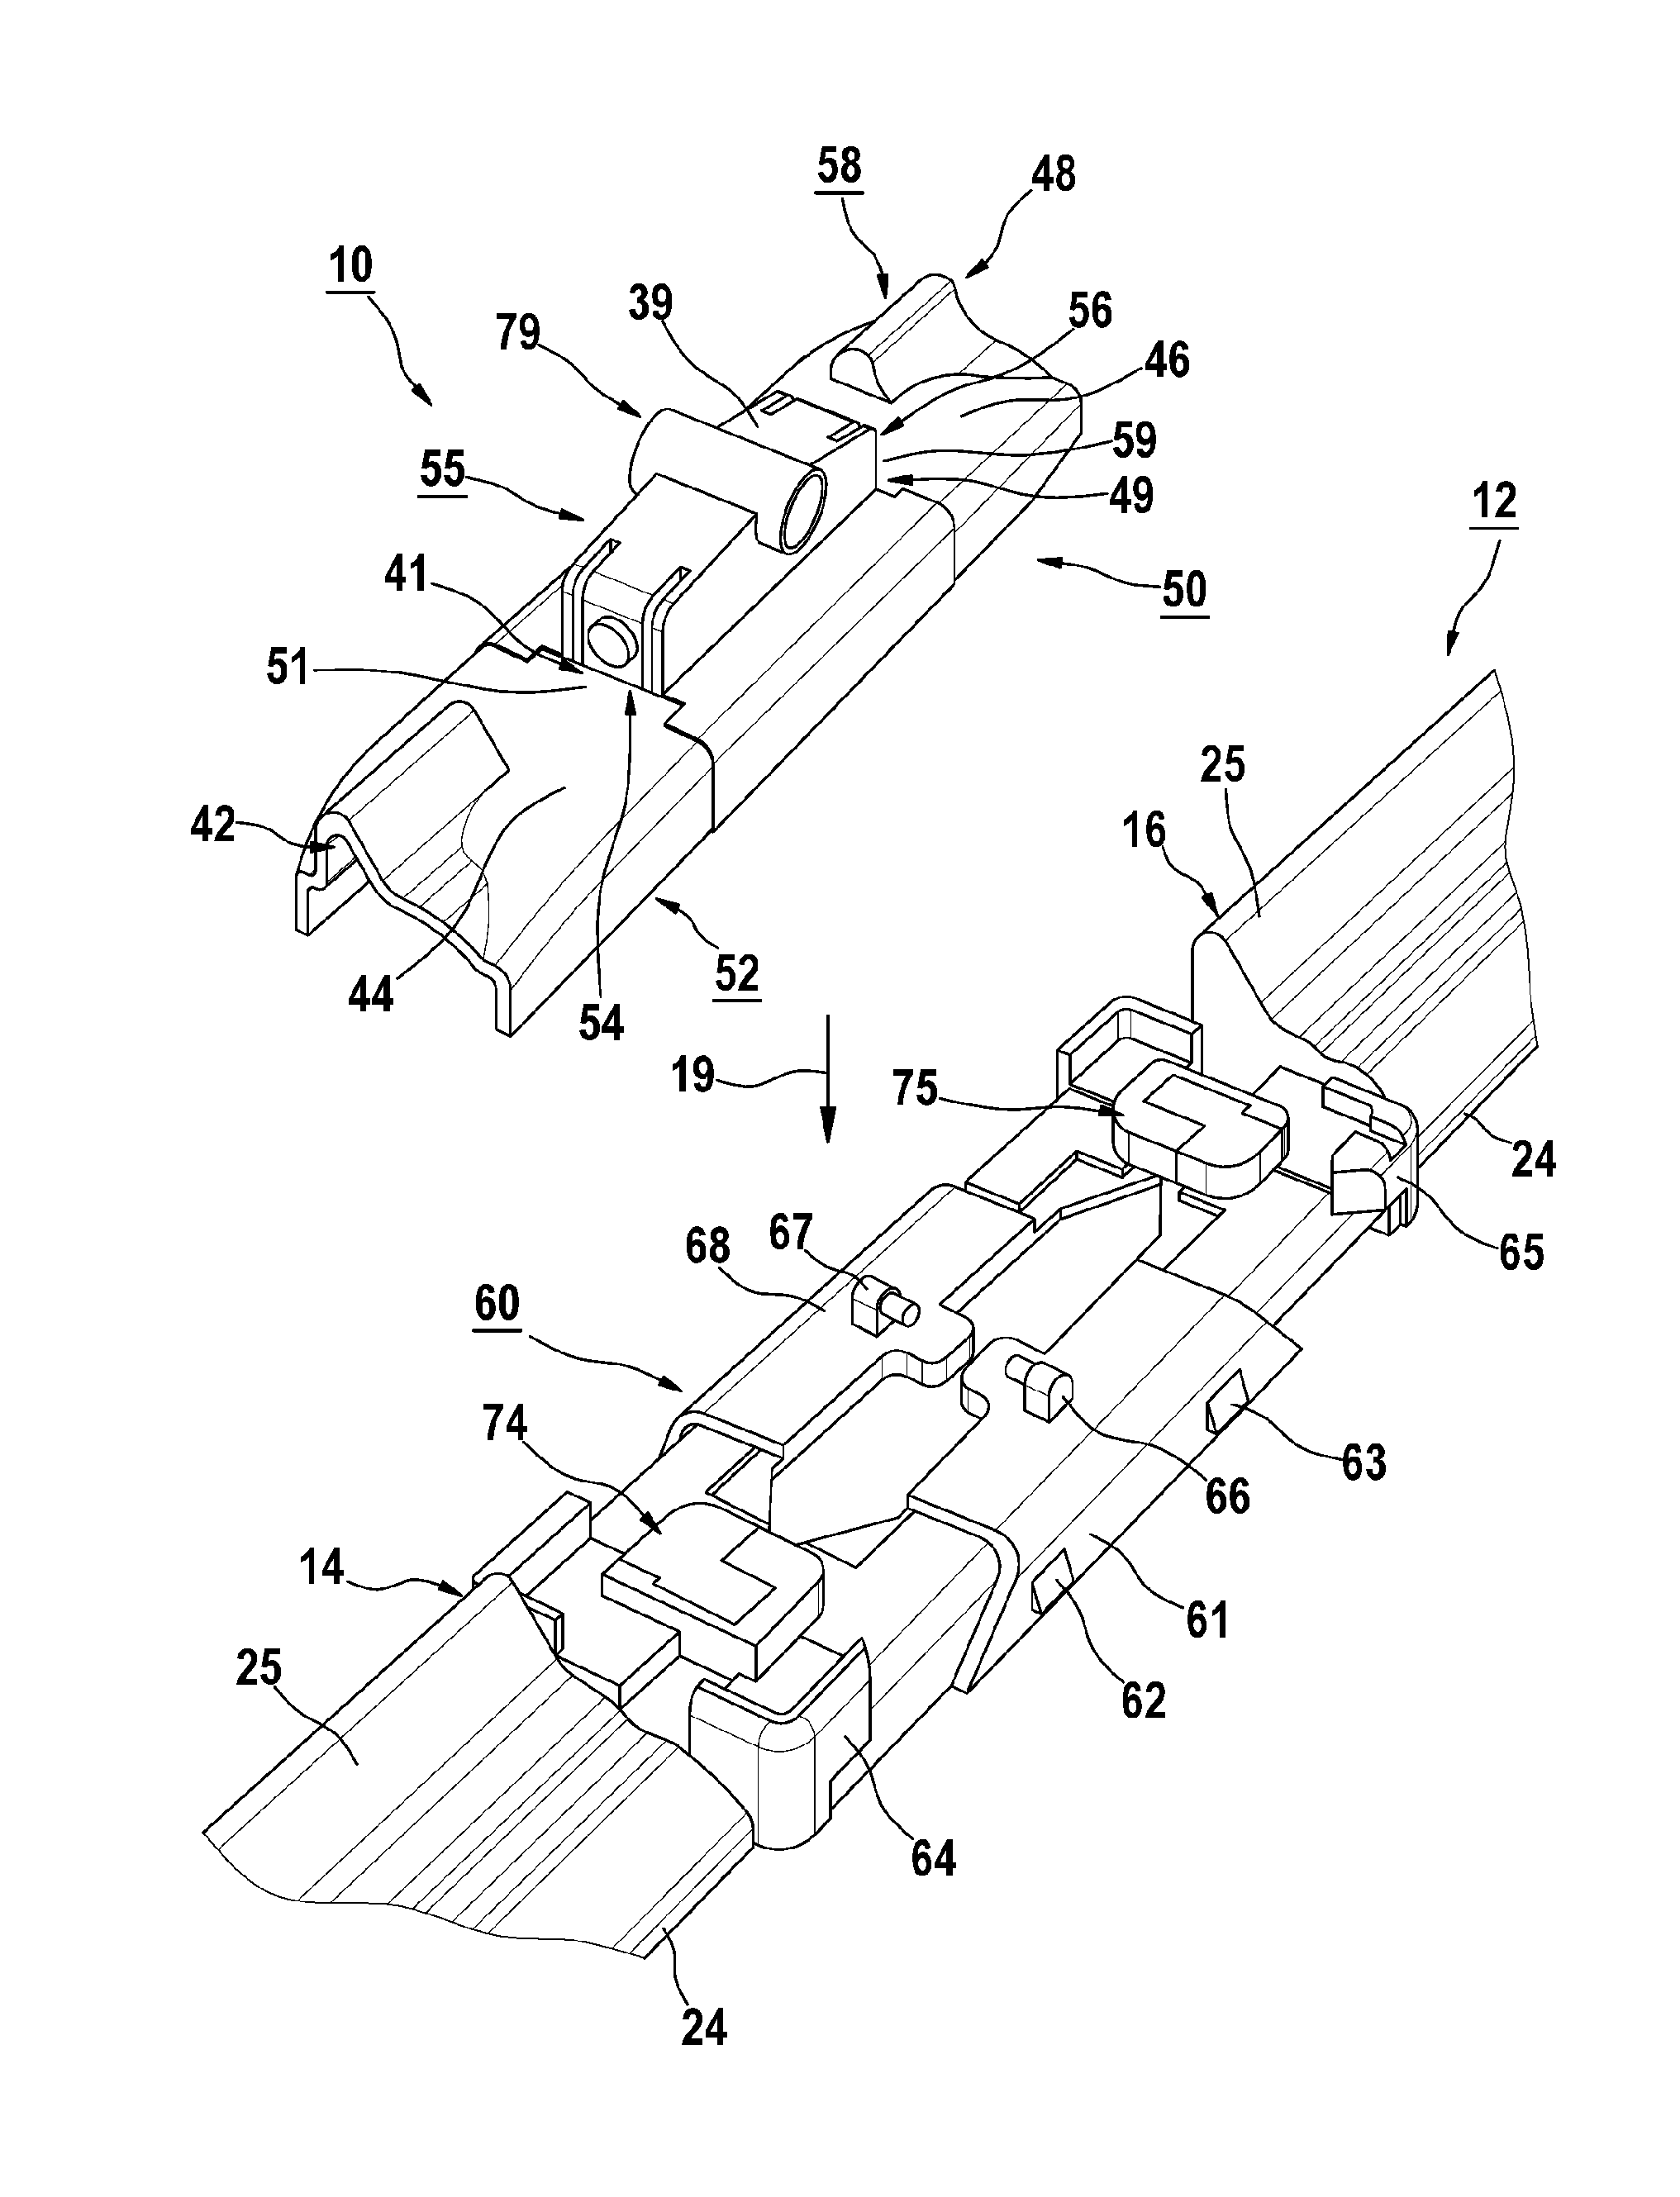 Wiper blade having an adapter unit for attaching to a wiper arm